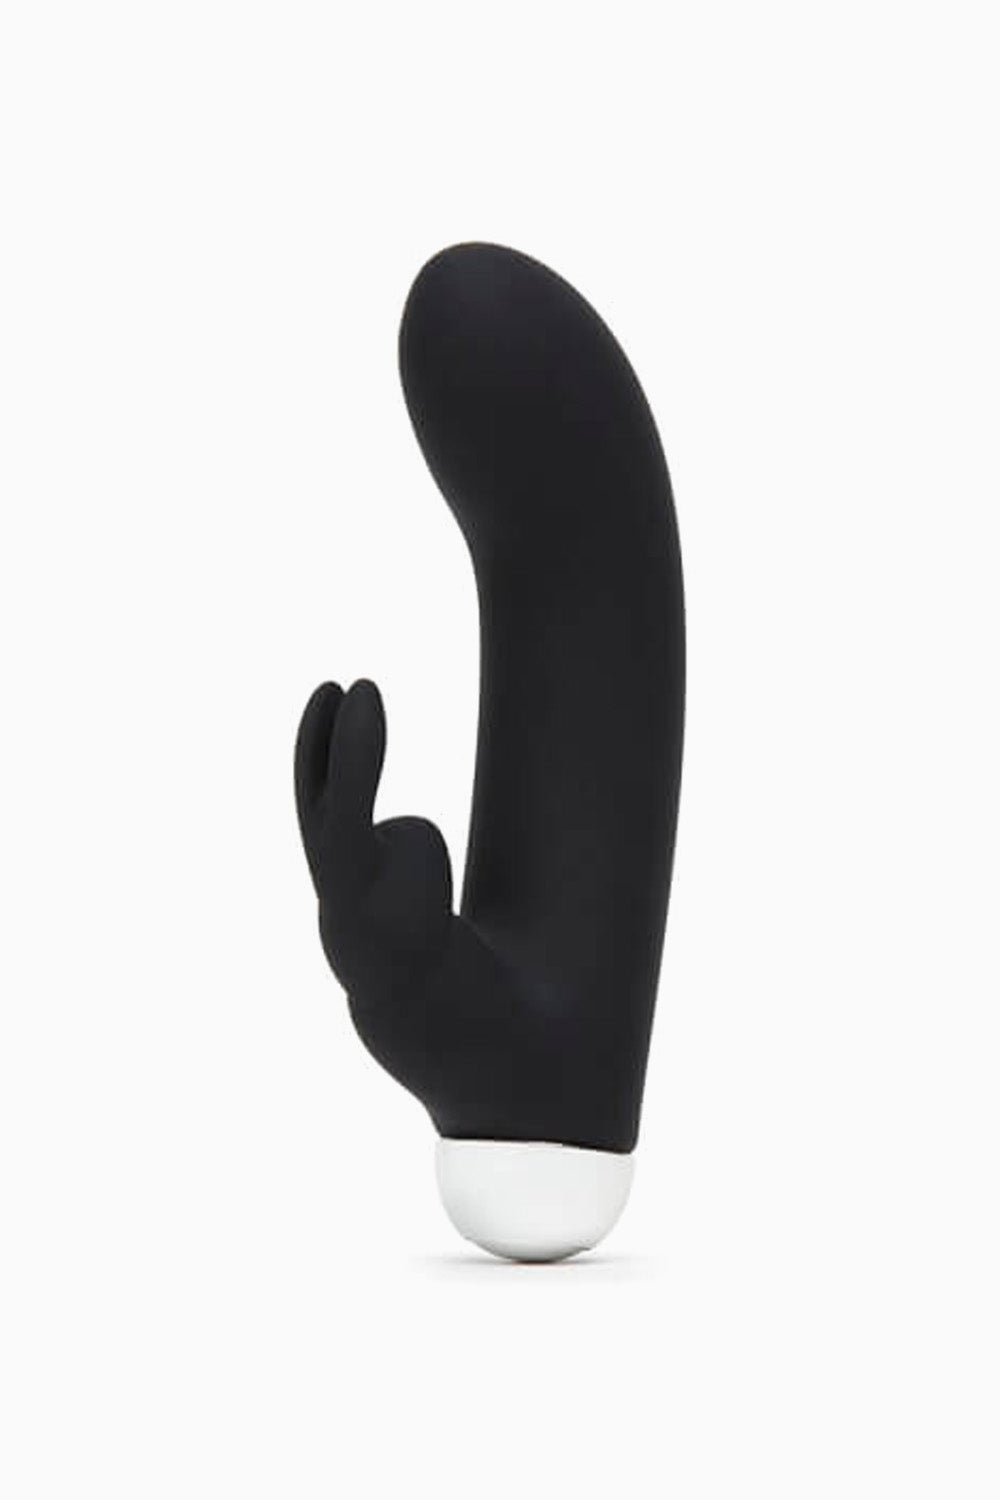 Fifty Shades of Grey Greedy Girl Rechargeable Mini Rabbit Vibrator, 5.5 Inches